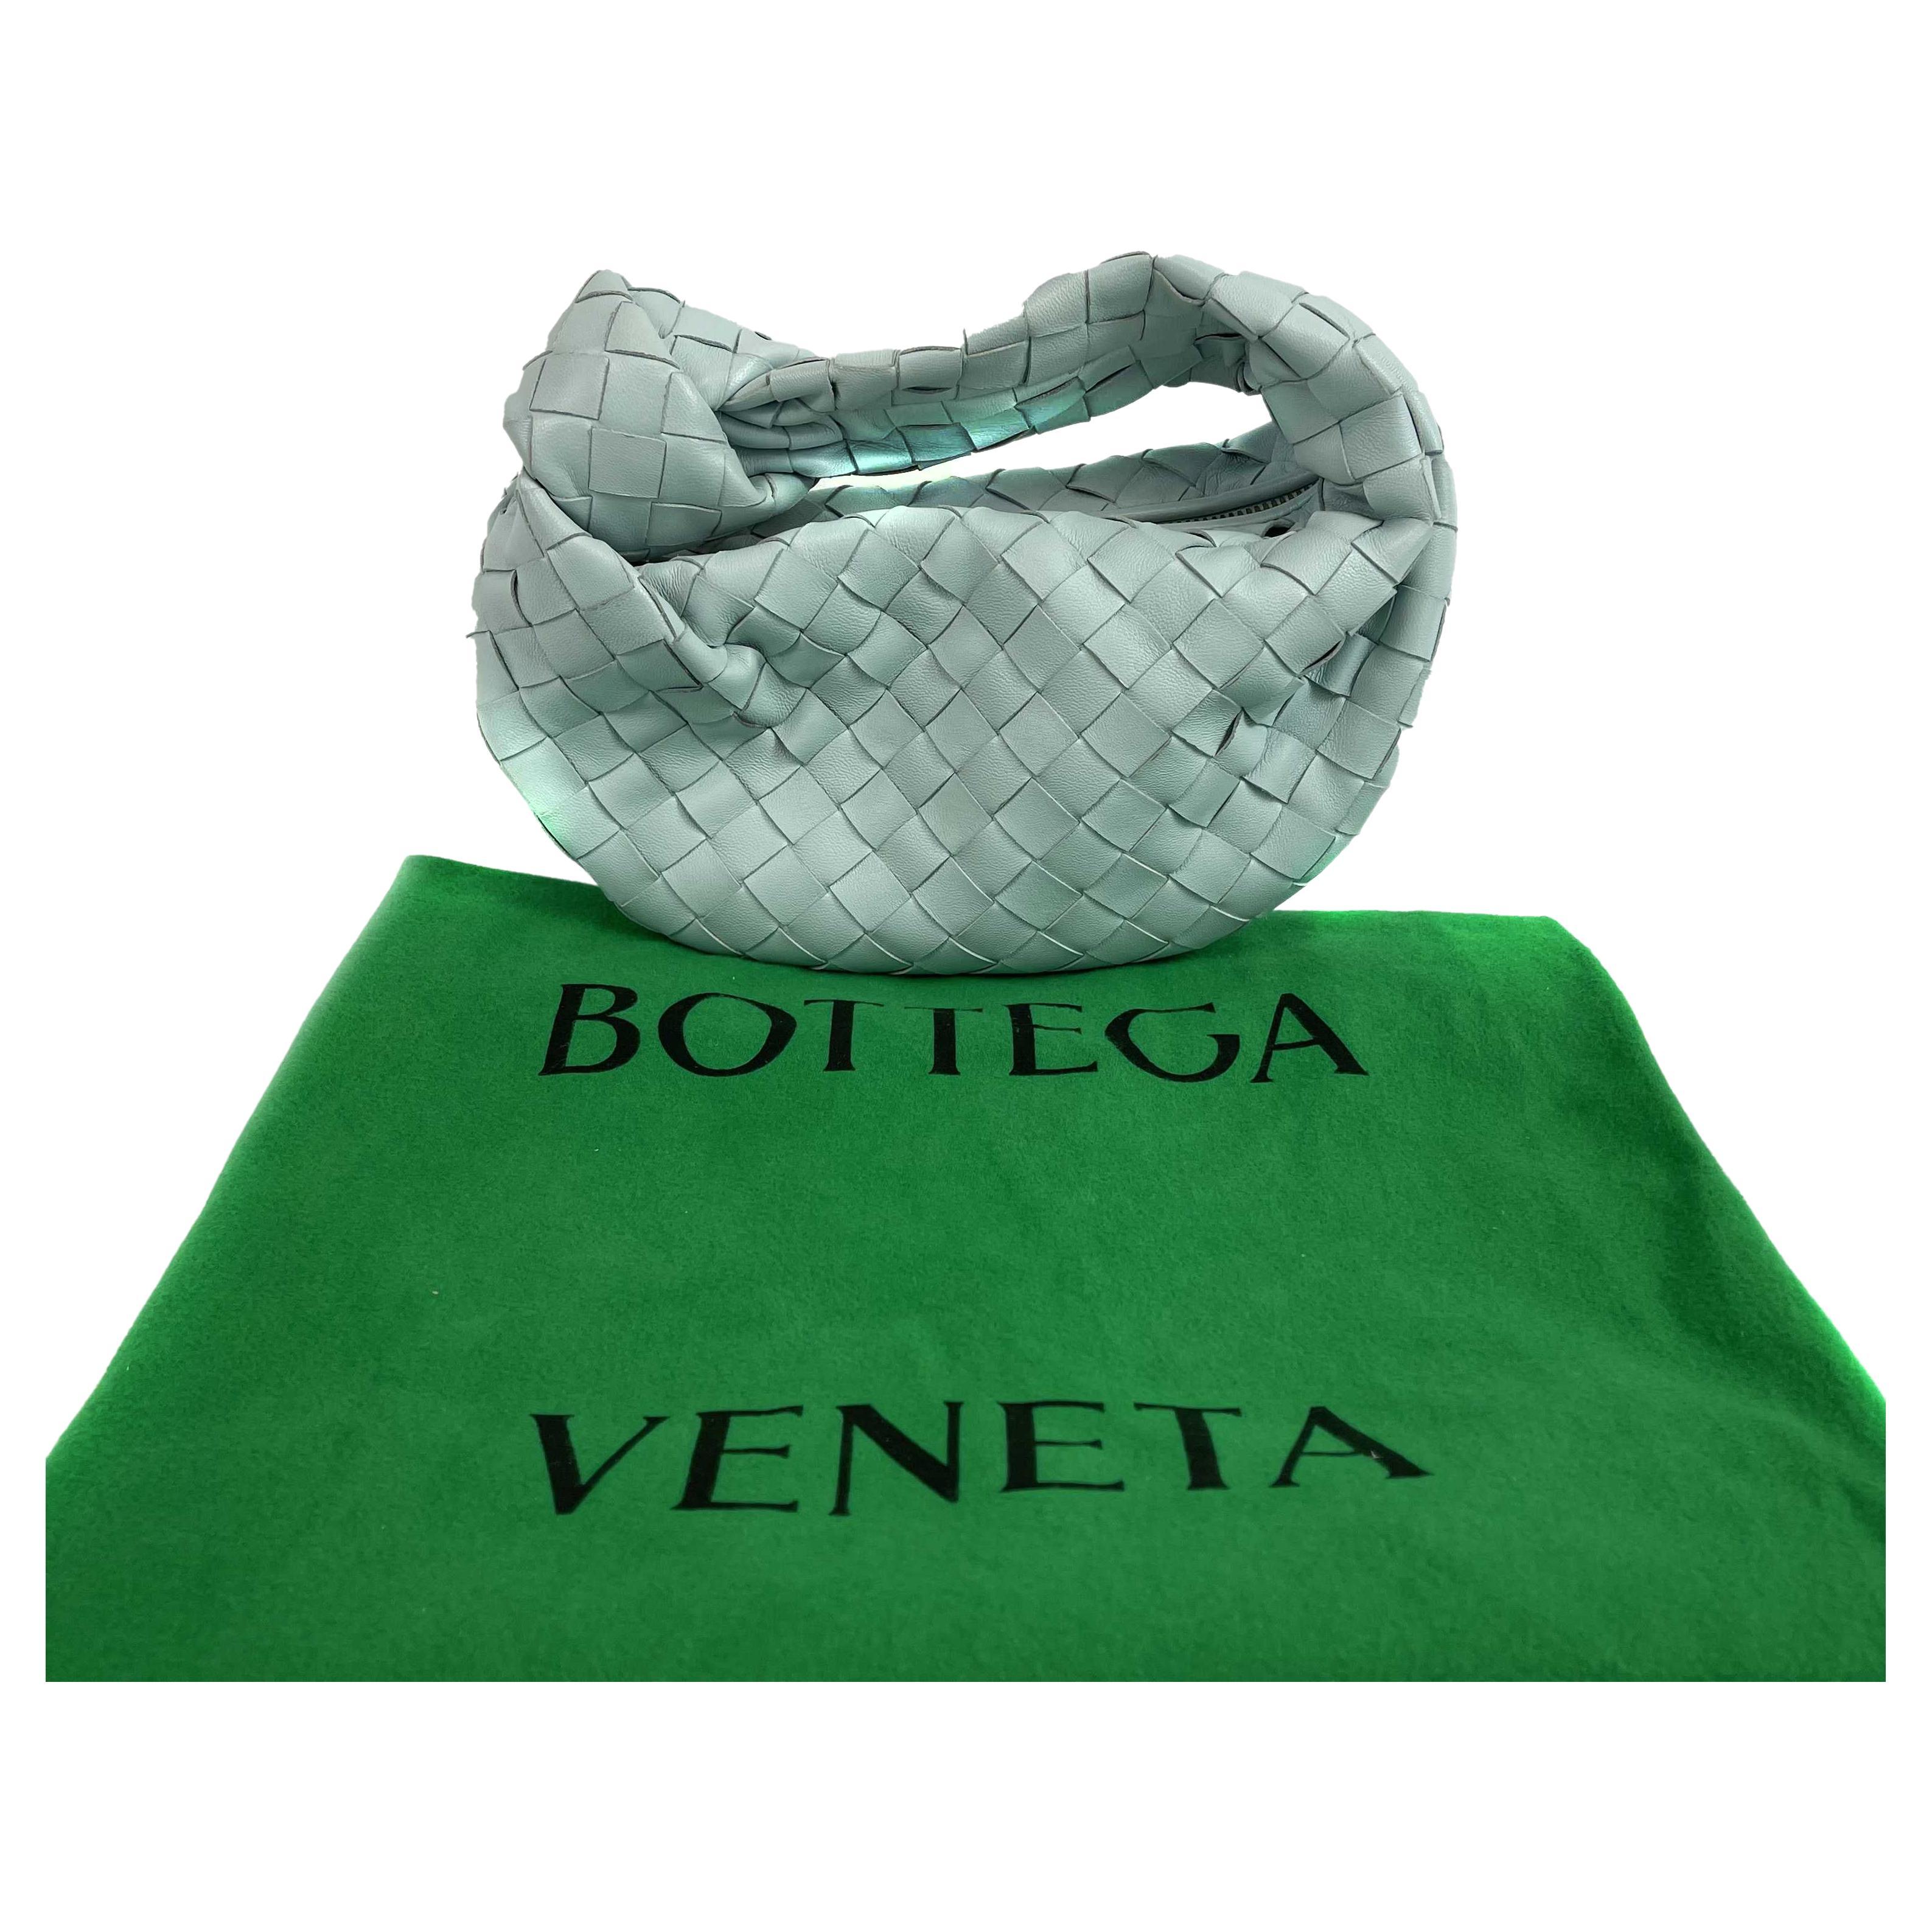 Bottega Veneta - Mini Jodie Knotted Leather Washed Teal Blue - Brand New For Sale